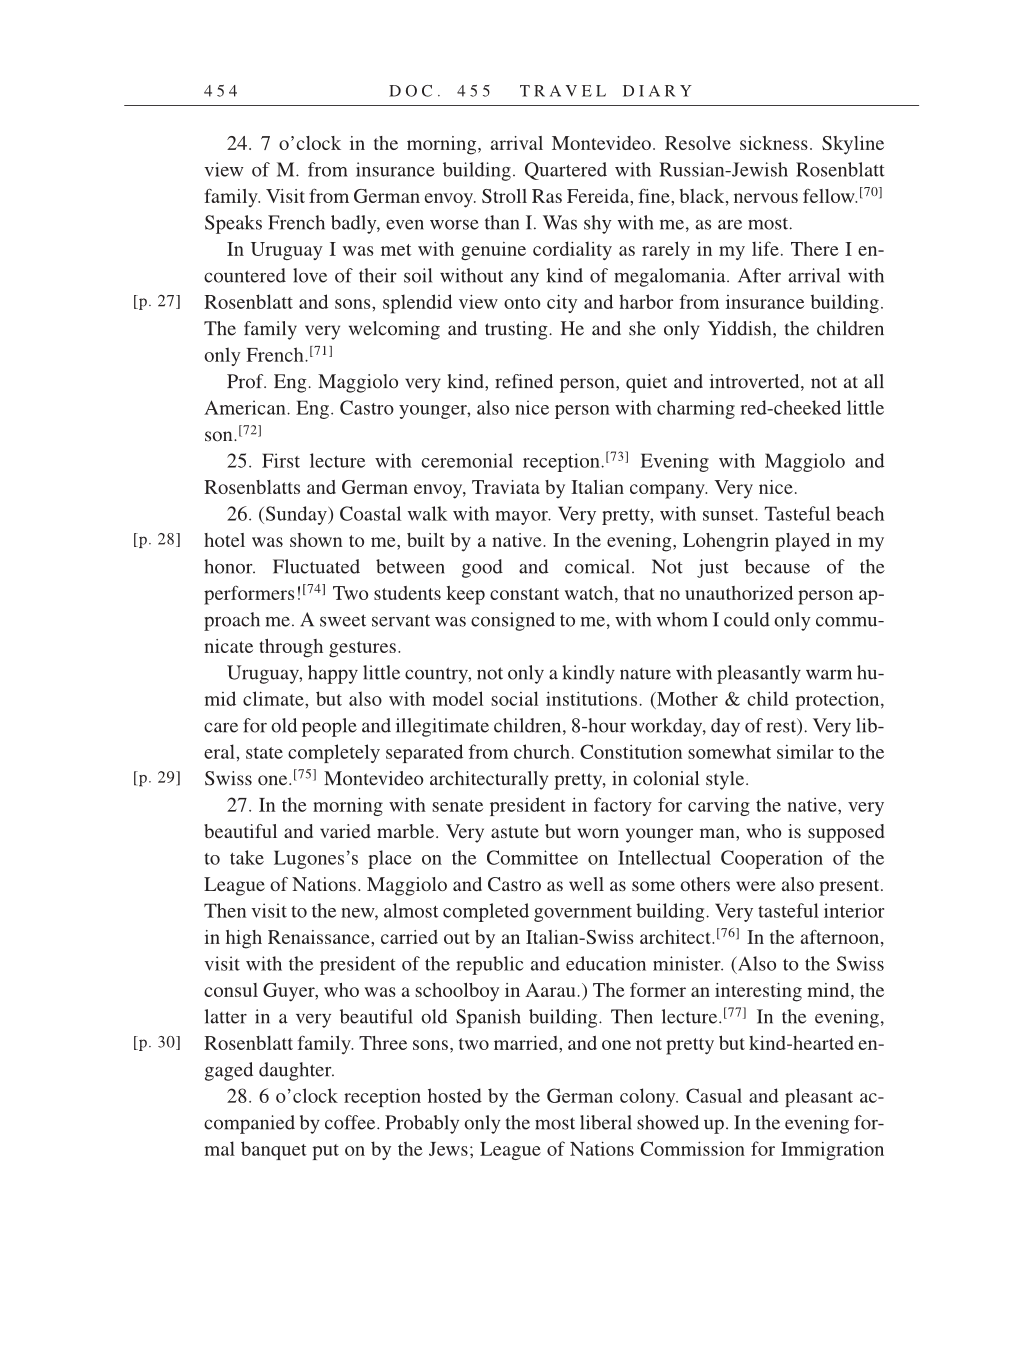 Volume 14: The Berlin Years: Writings & Correspondence, April 1923-May 1925 (English Translation Supplement) page 454